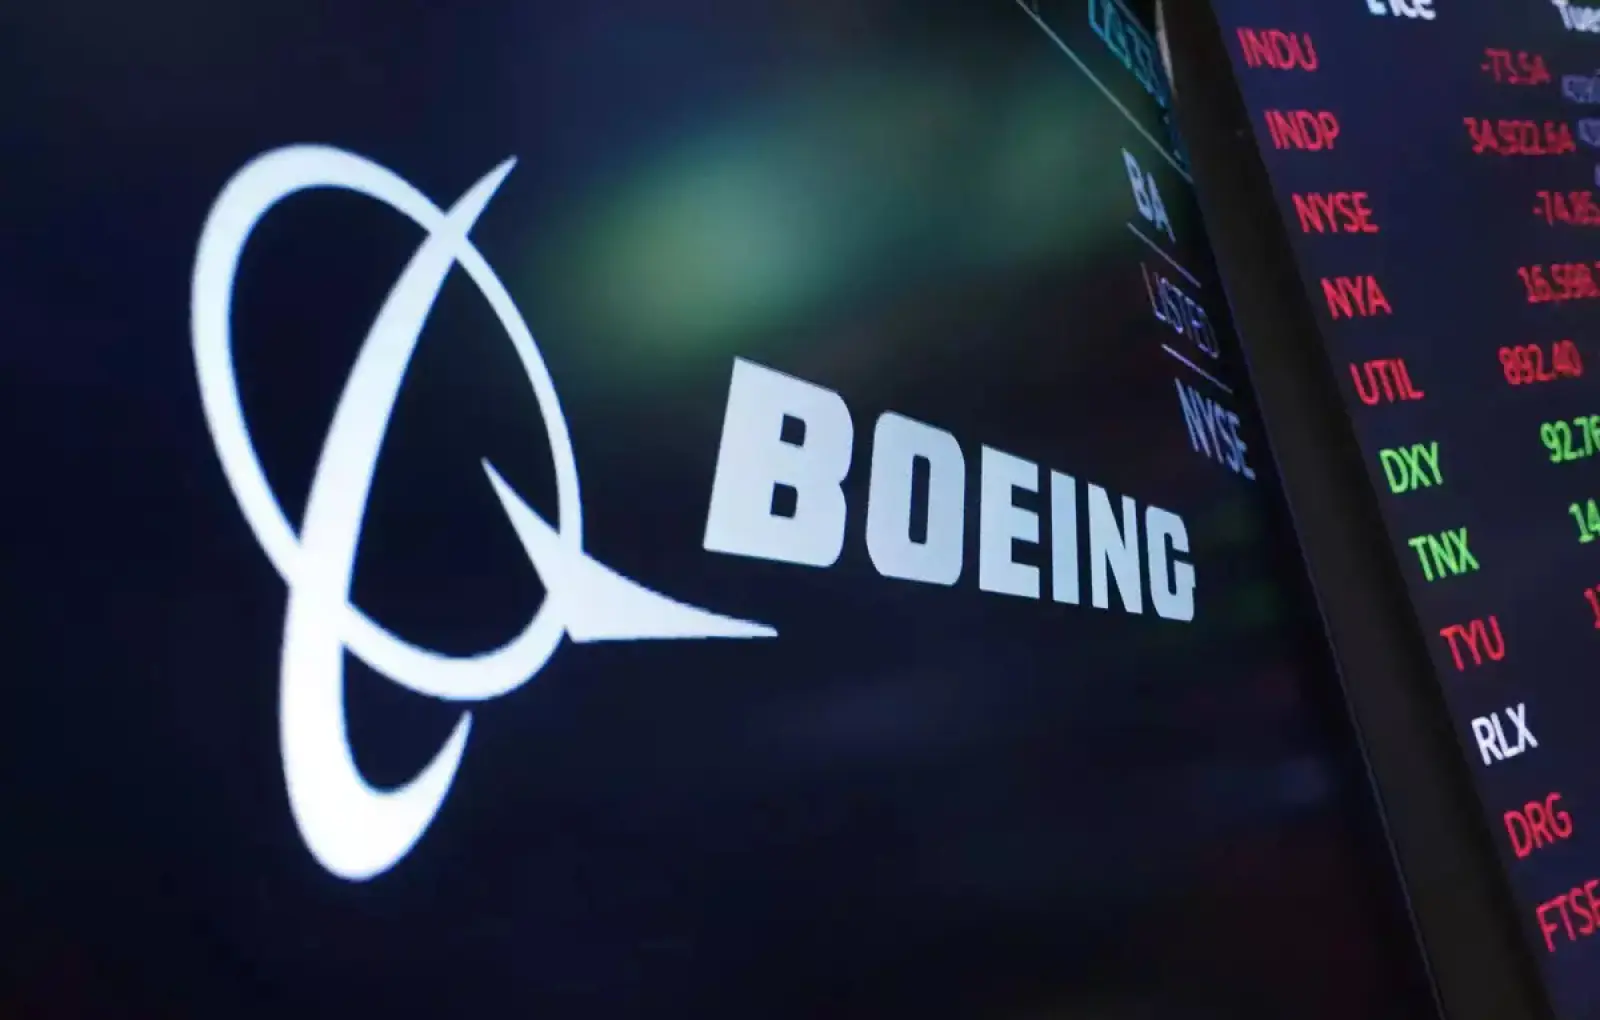 Boeing is in talks with the government to resolve disputes related to security flaws, reports claim